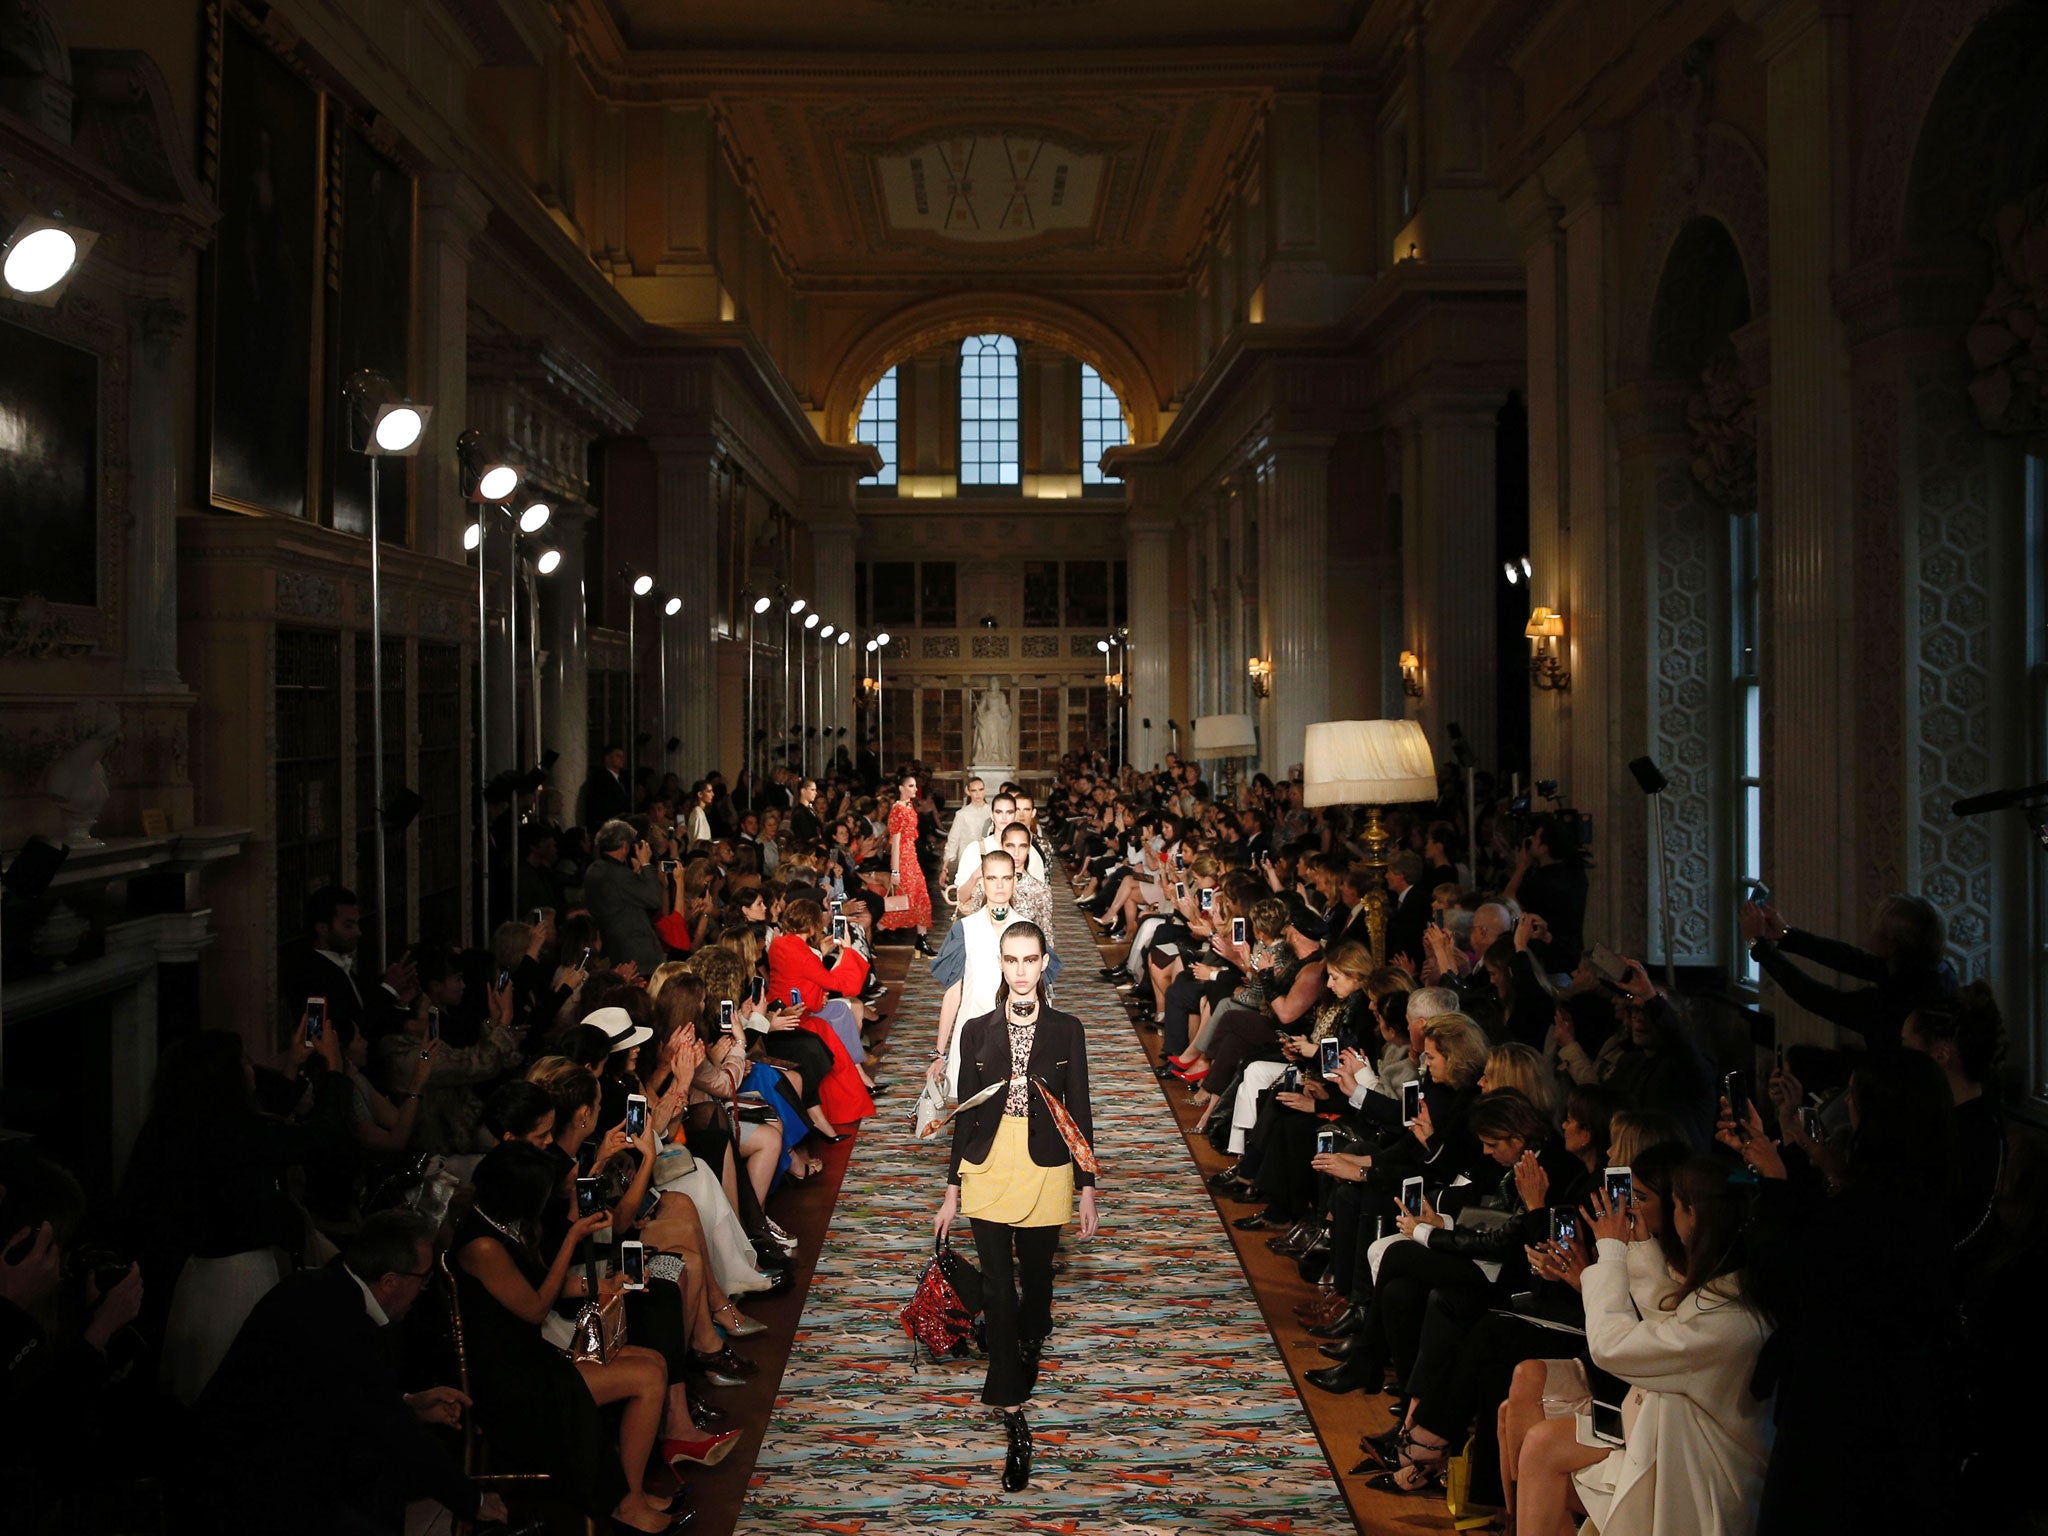 Dior's 2017 Cruise collection was shown at Blenheim Palace